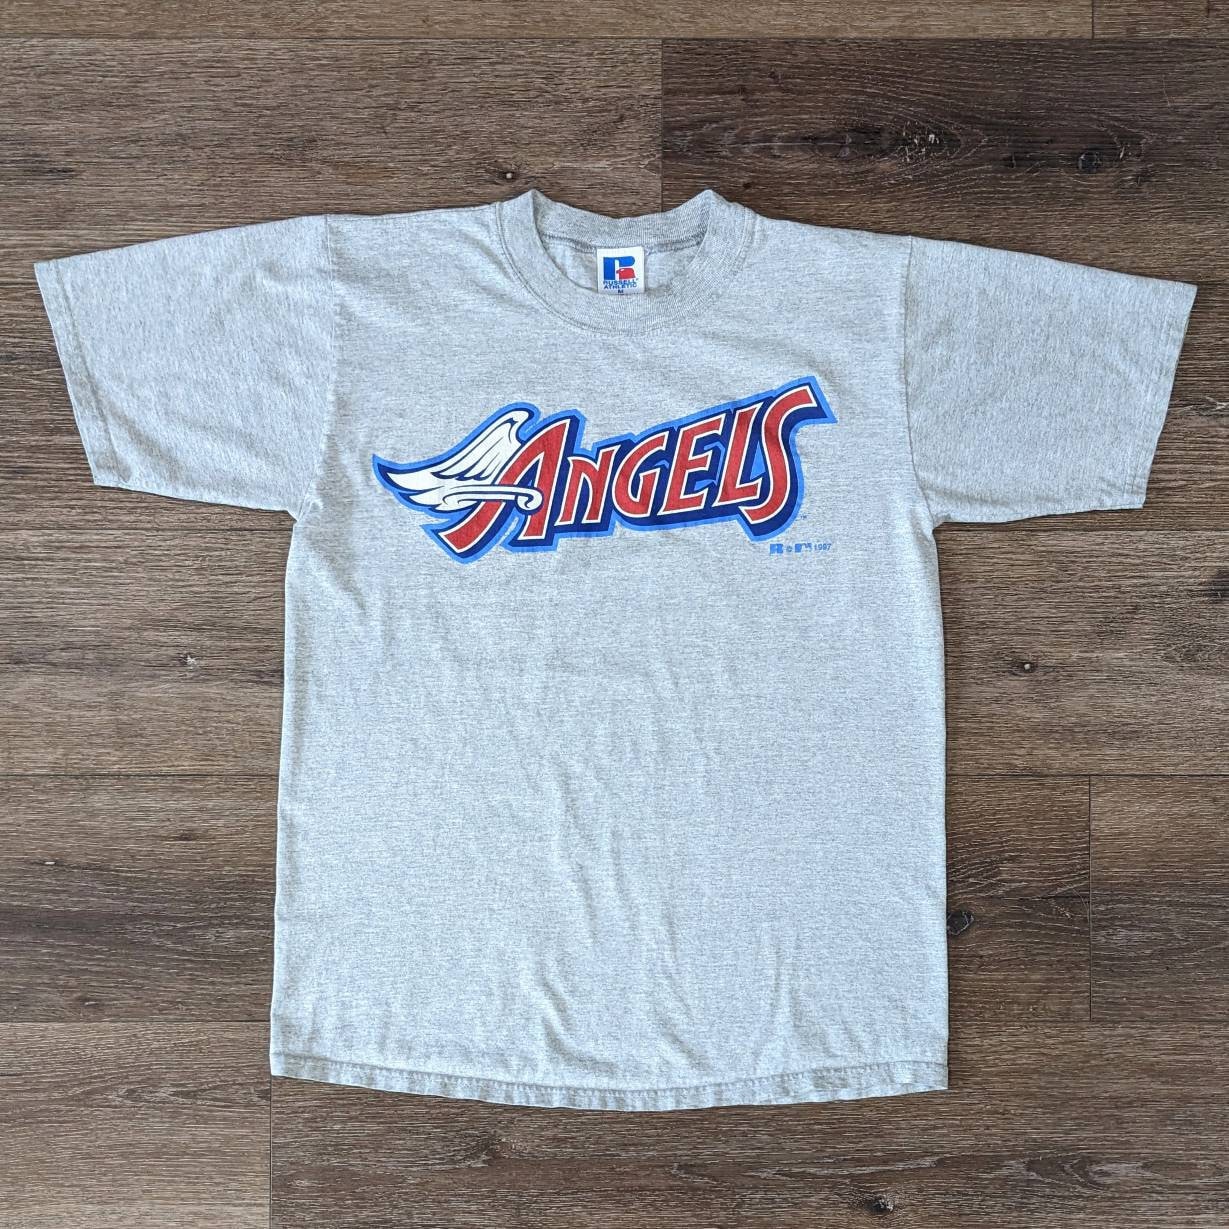 Anaheim Angels MLB Vintage Navy Blue Russell Athletic Jersey Shirt Mens XL